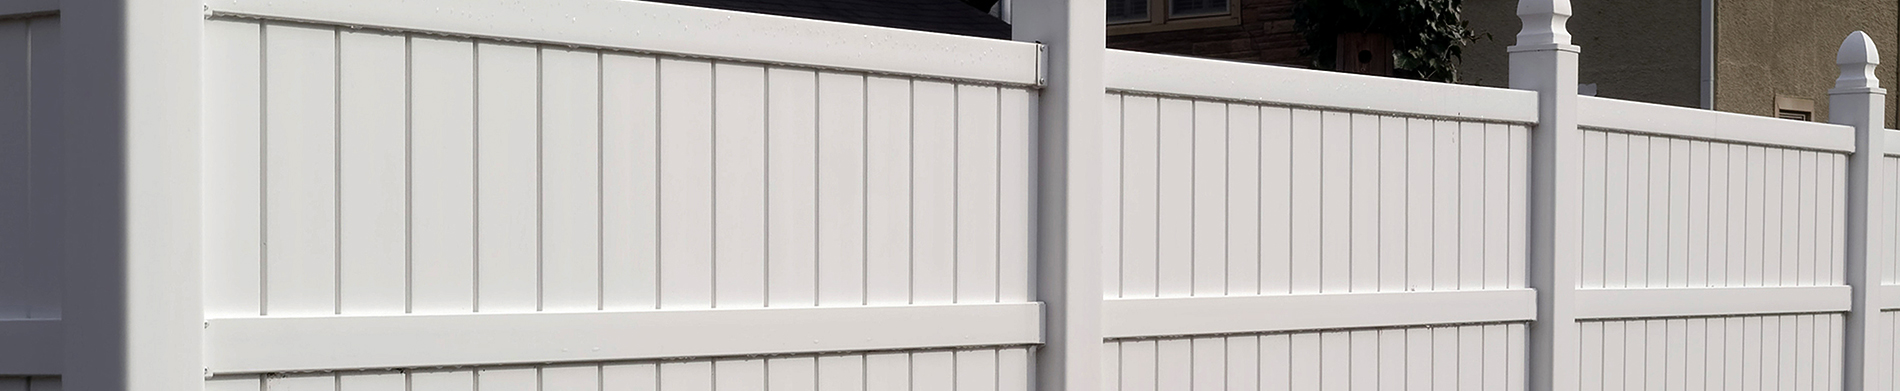 Eleven Vital Aspects to Keep in Mind when Buying Vinyl Privacy Fence Panels